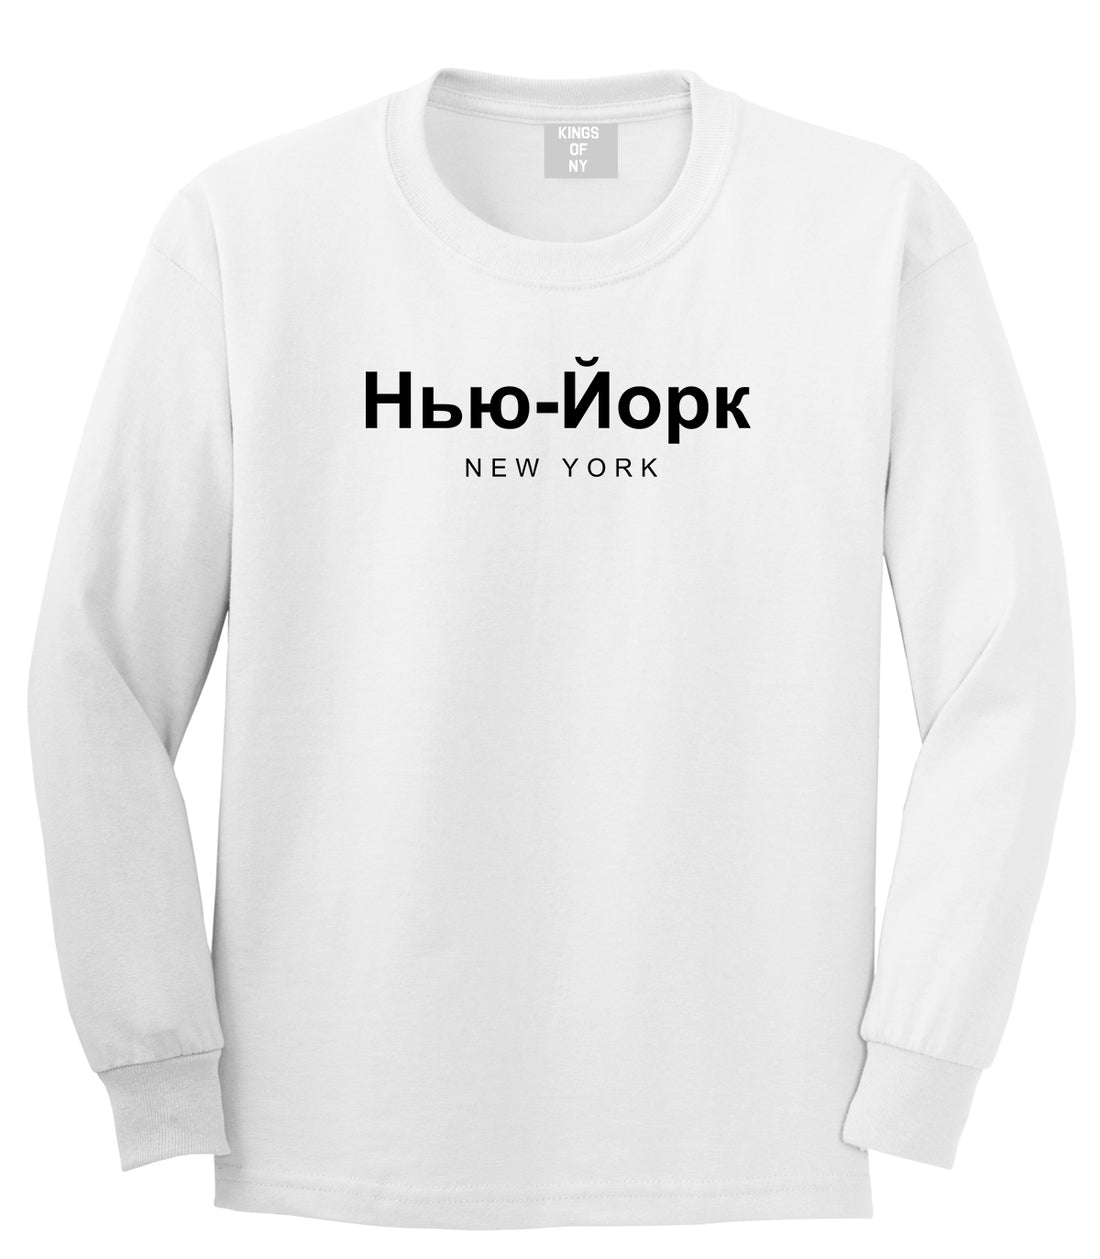 New York In Russian Mens Long Sleeve T-Shirt White by Kings Of NY